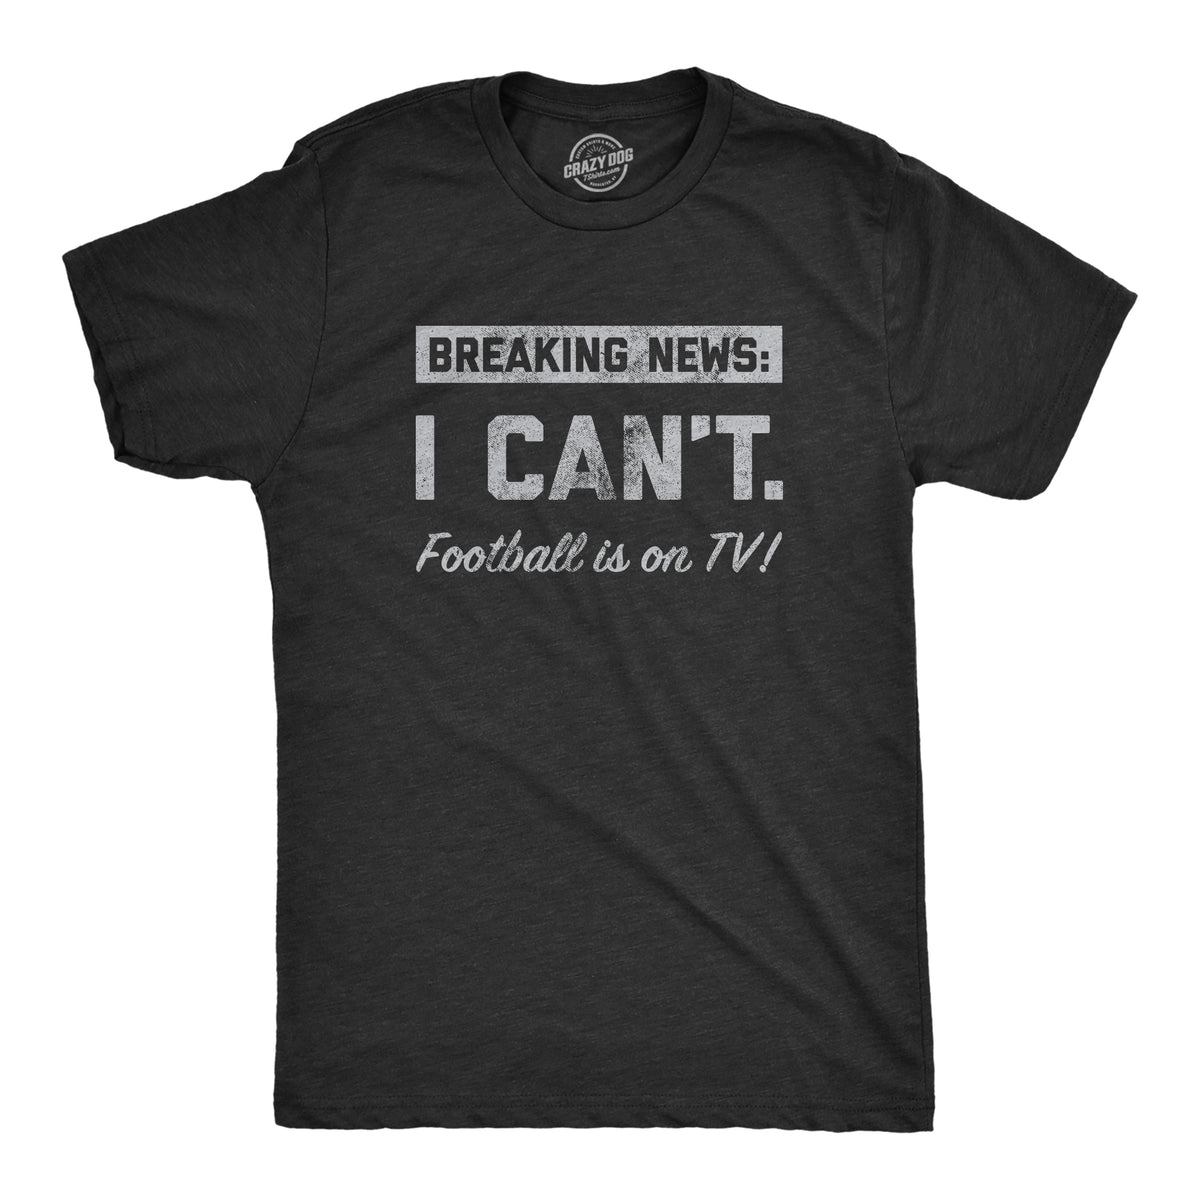 Funny Heather Black - TV Breaking News I Cant Football Is On TV Mens T Shirt Nerdy Football Tee